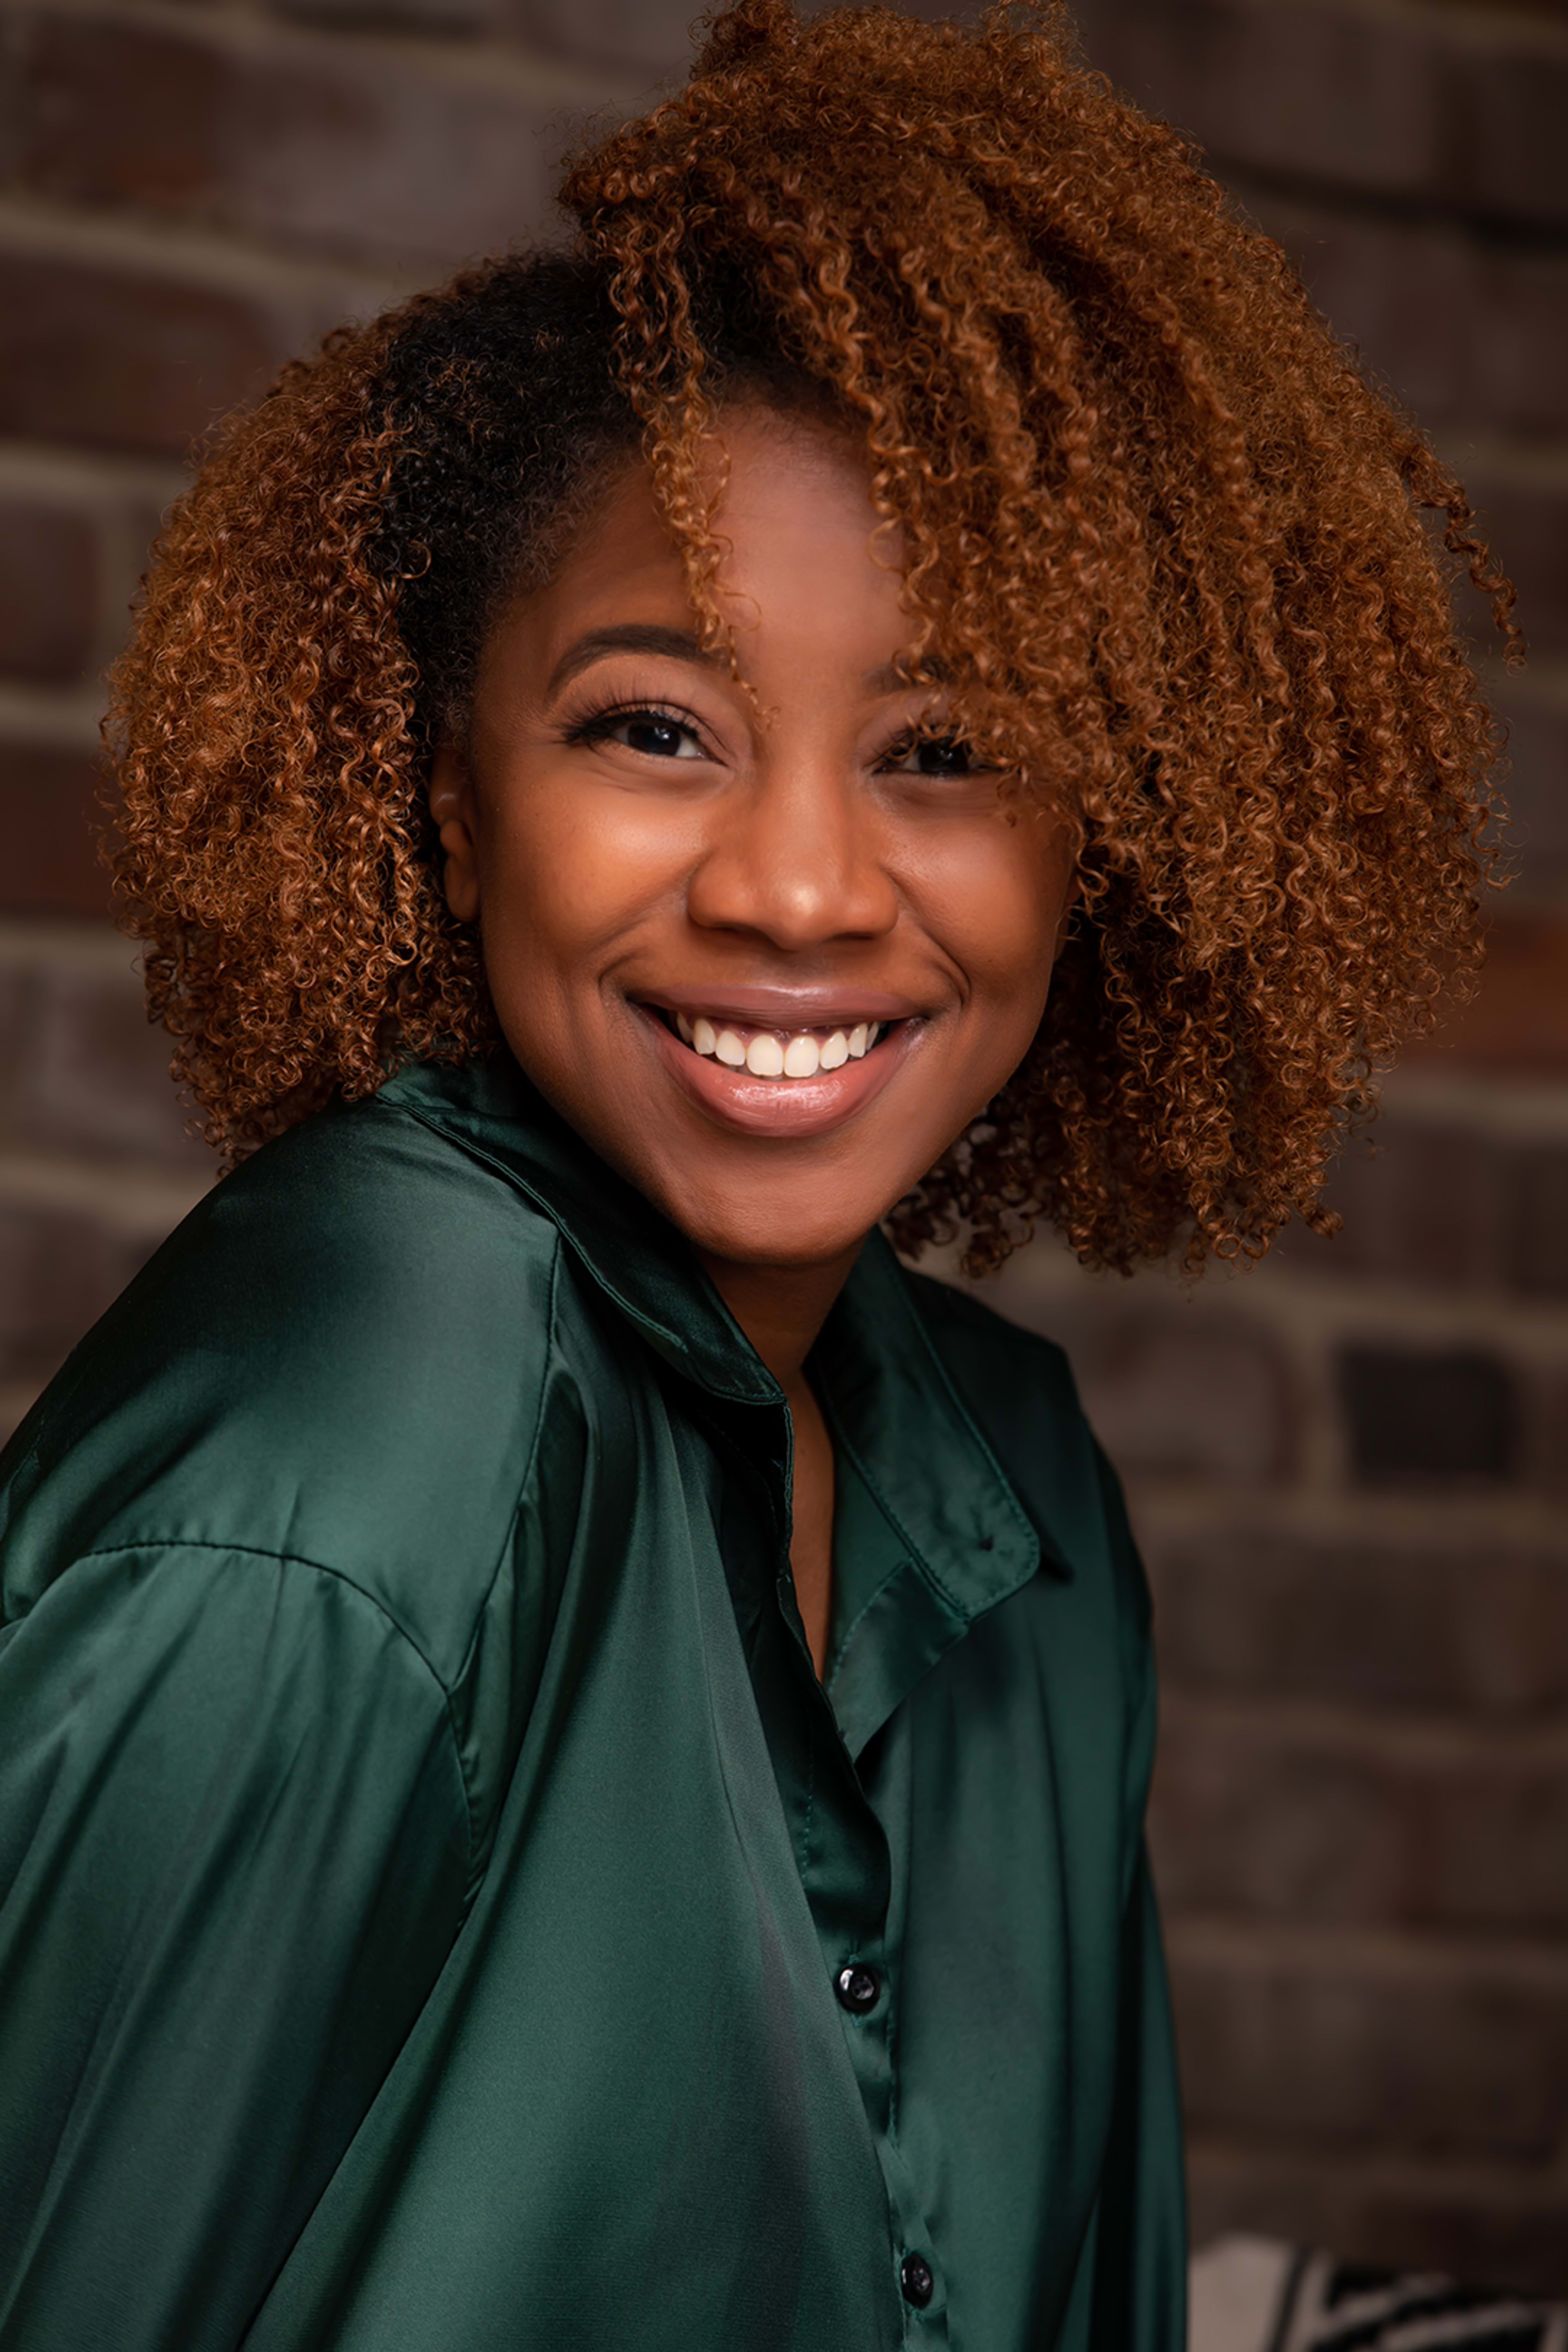 A woman with curly hair smiling for the camera for a portrait photoshoot.